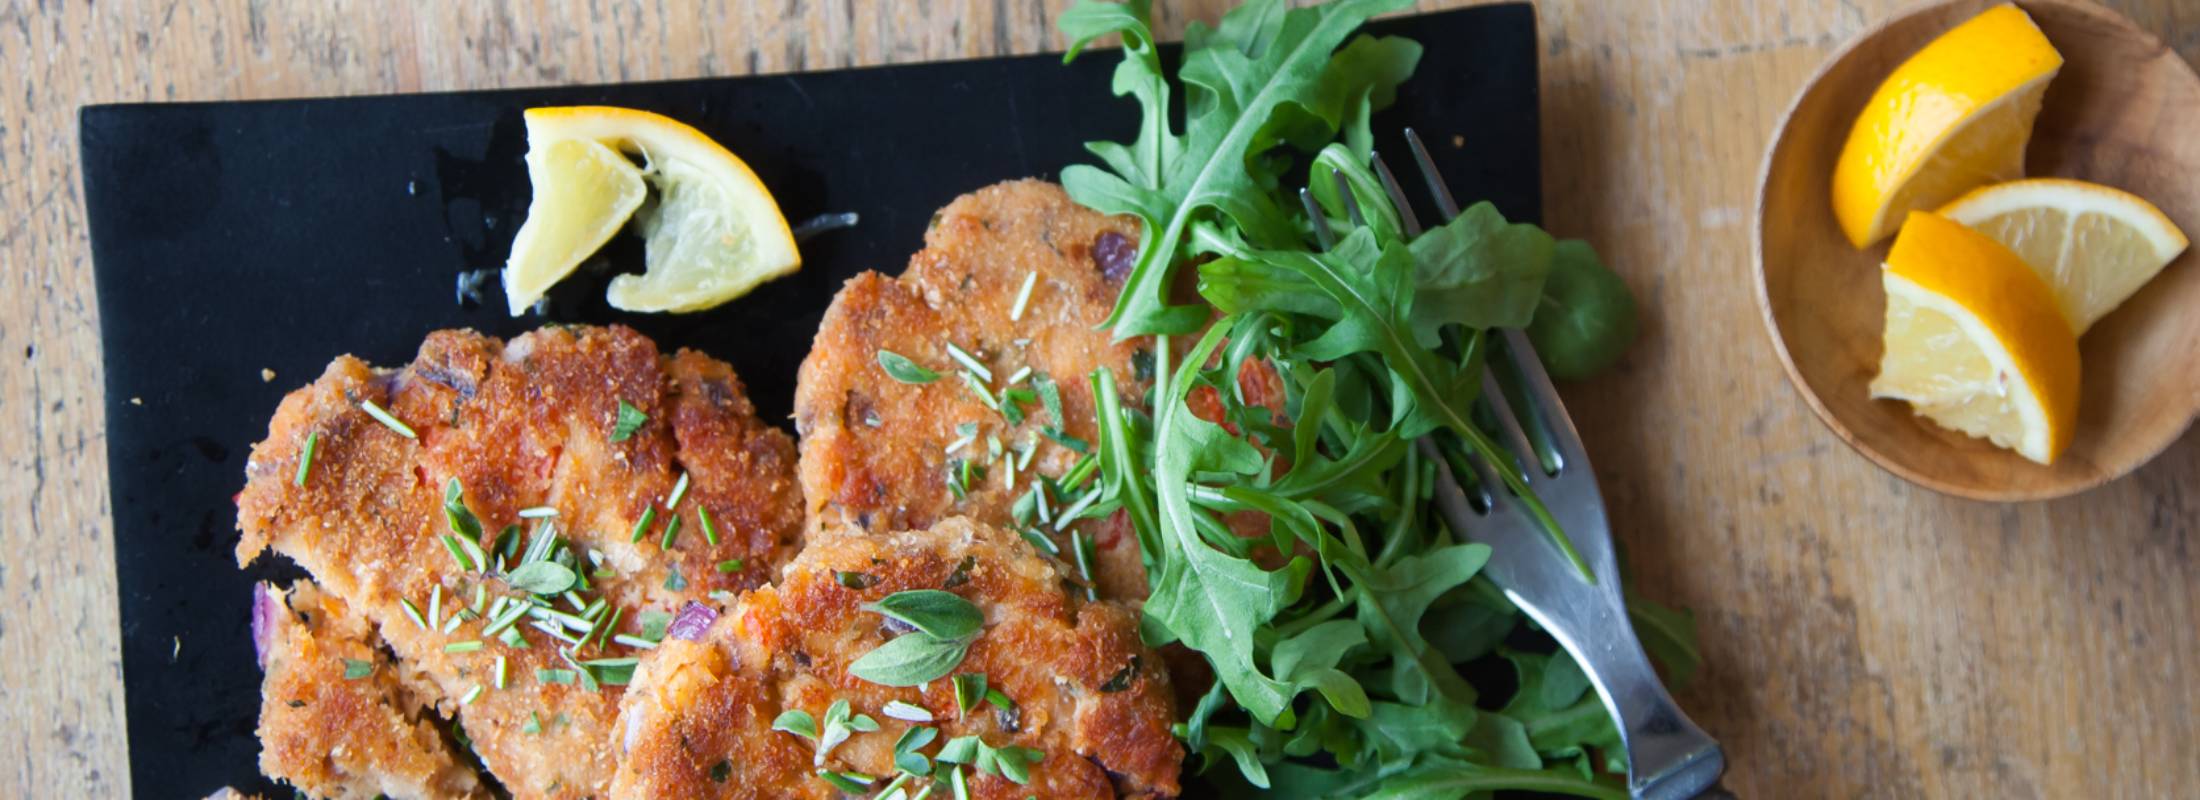 Wild Salmon Cakes on a black plate with arugula, old fork next to a bowl of lemon wedges